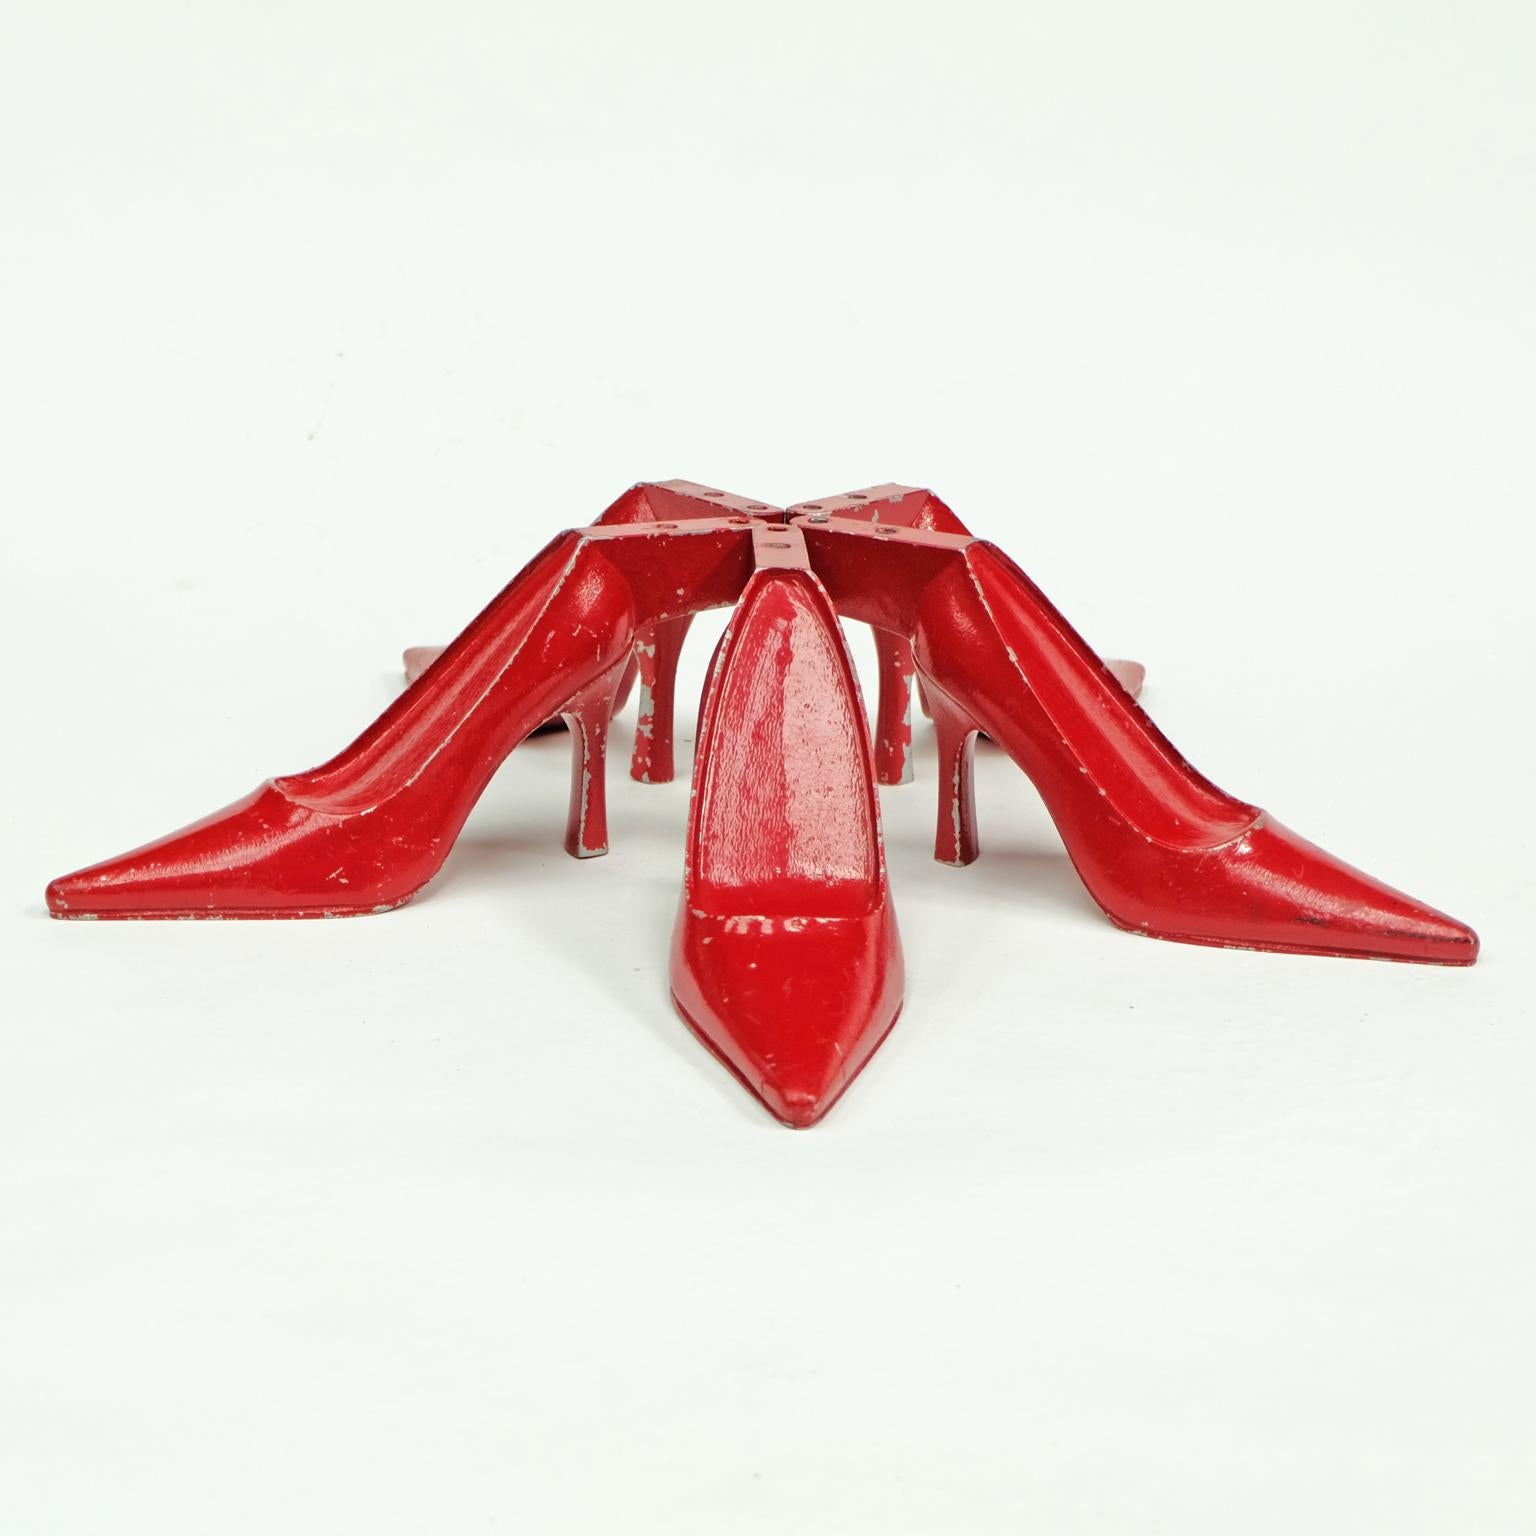 Mid-Century Modern 1950s Red Metal High Heel Stiletto Shoe Display Pop Art, 5 x available For Sale